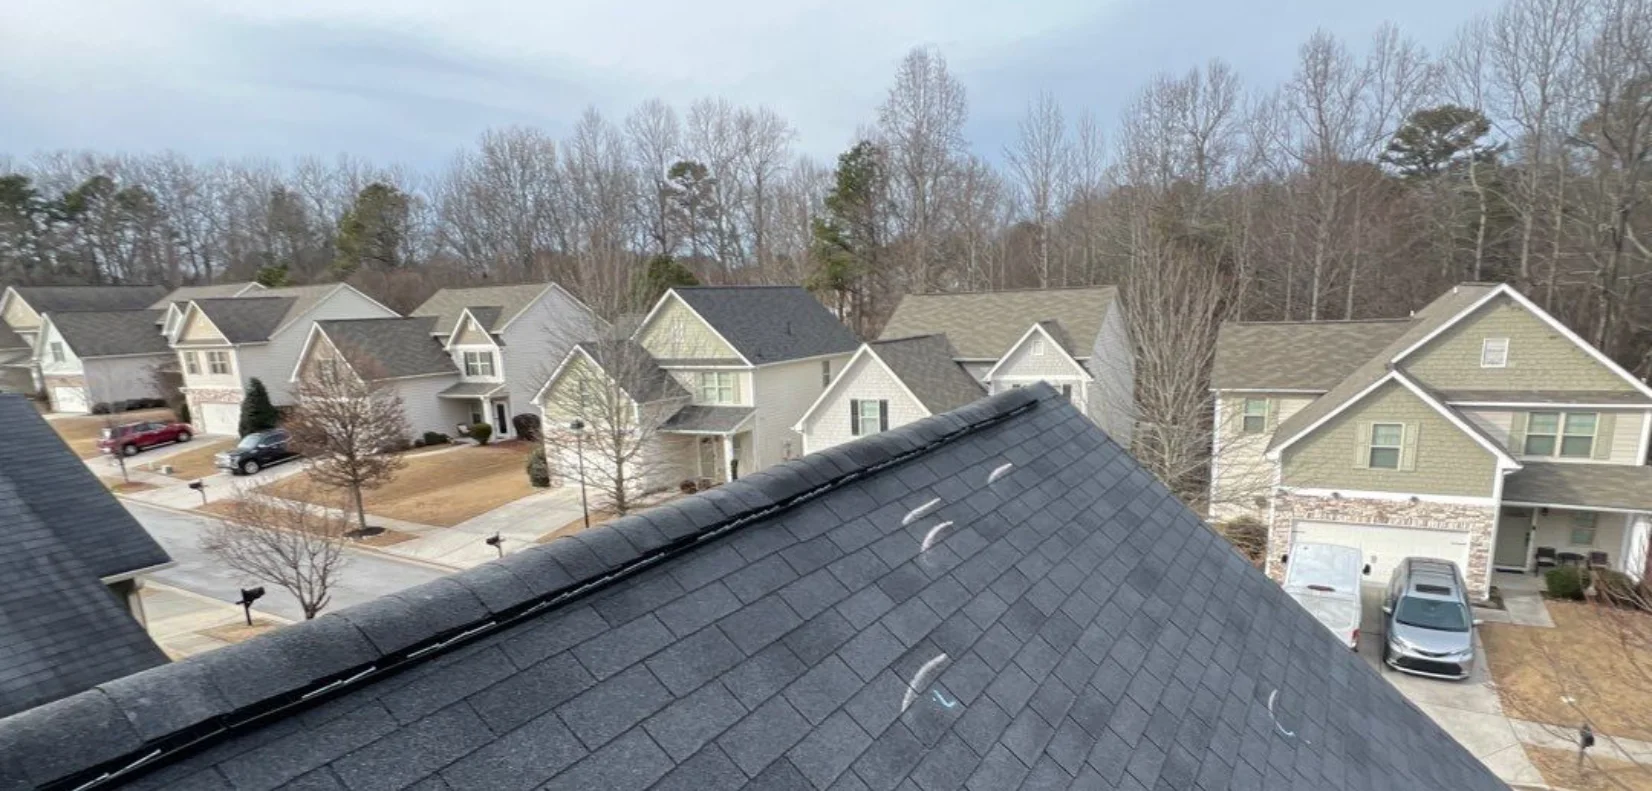 ROOFING CONTRACTOR IN BUFORD, GA